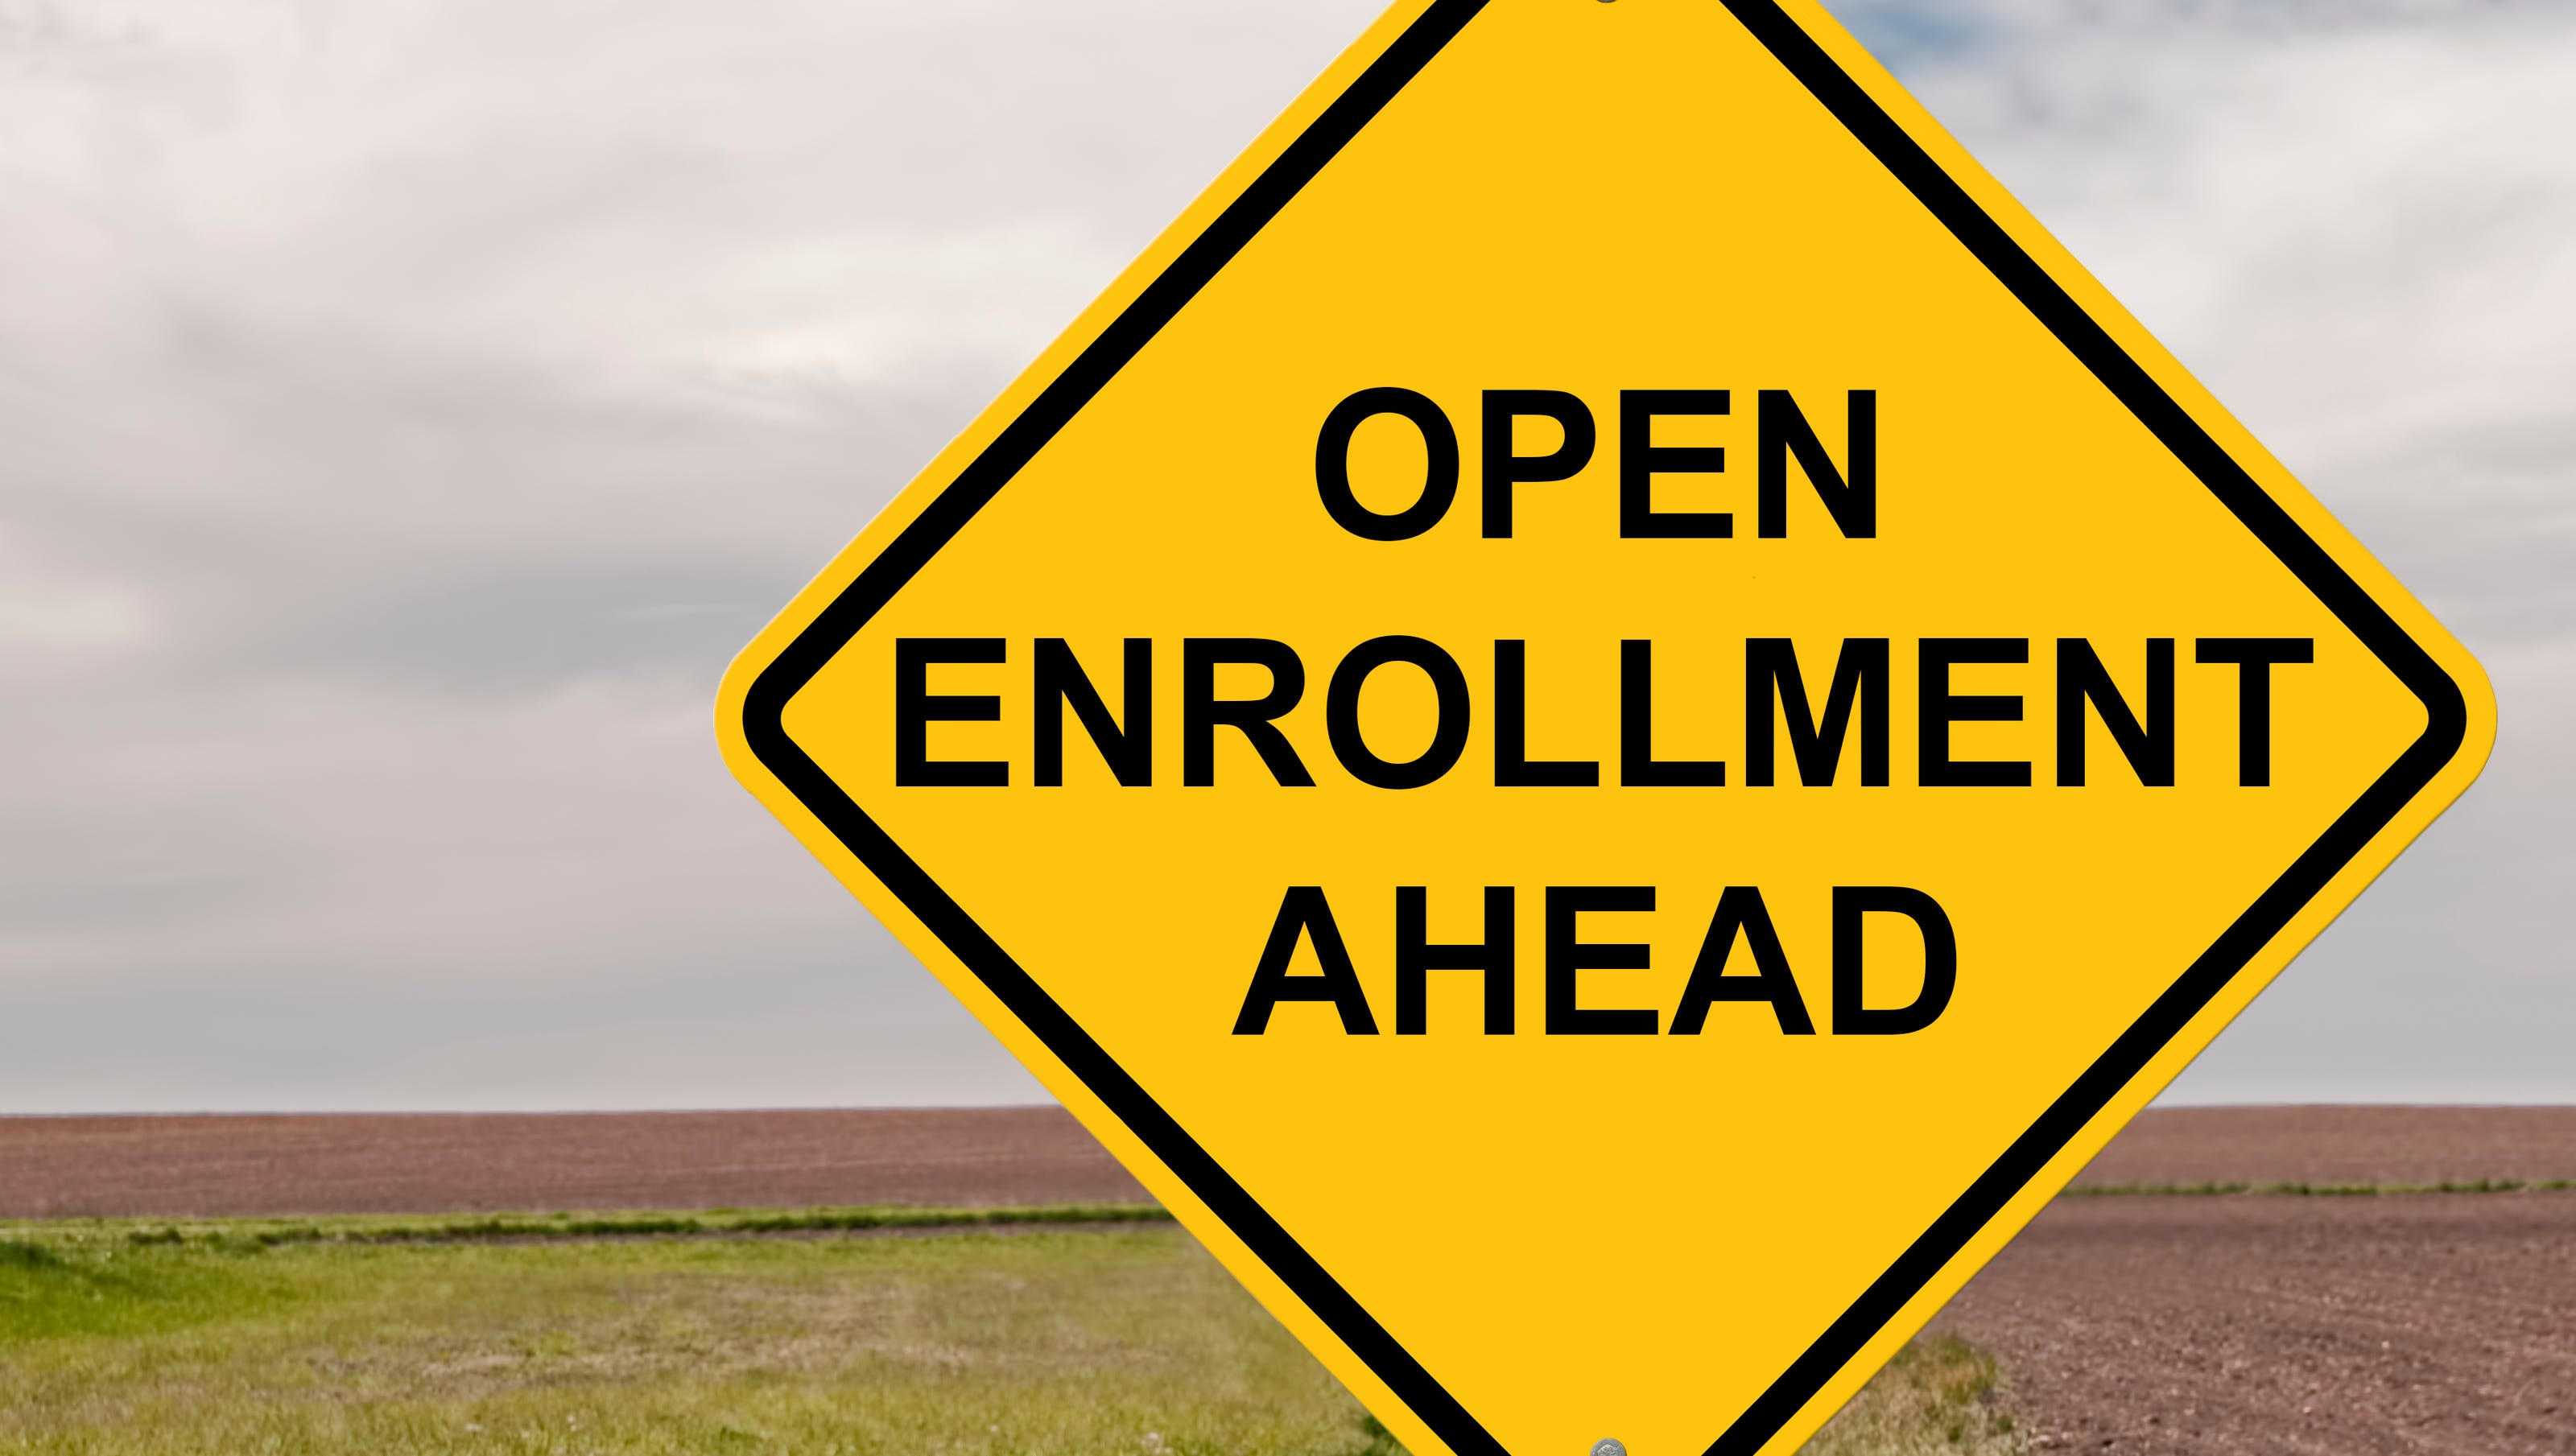 Medicare open enrollment period 2022: What to know about plan options